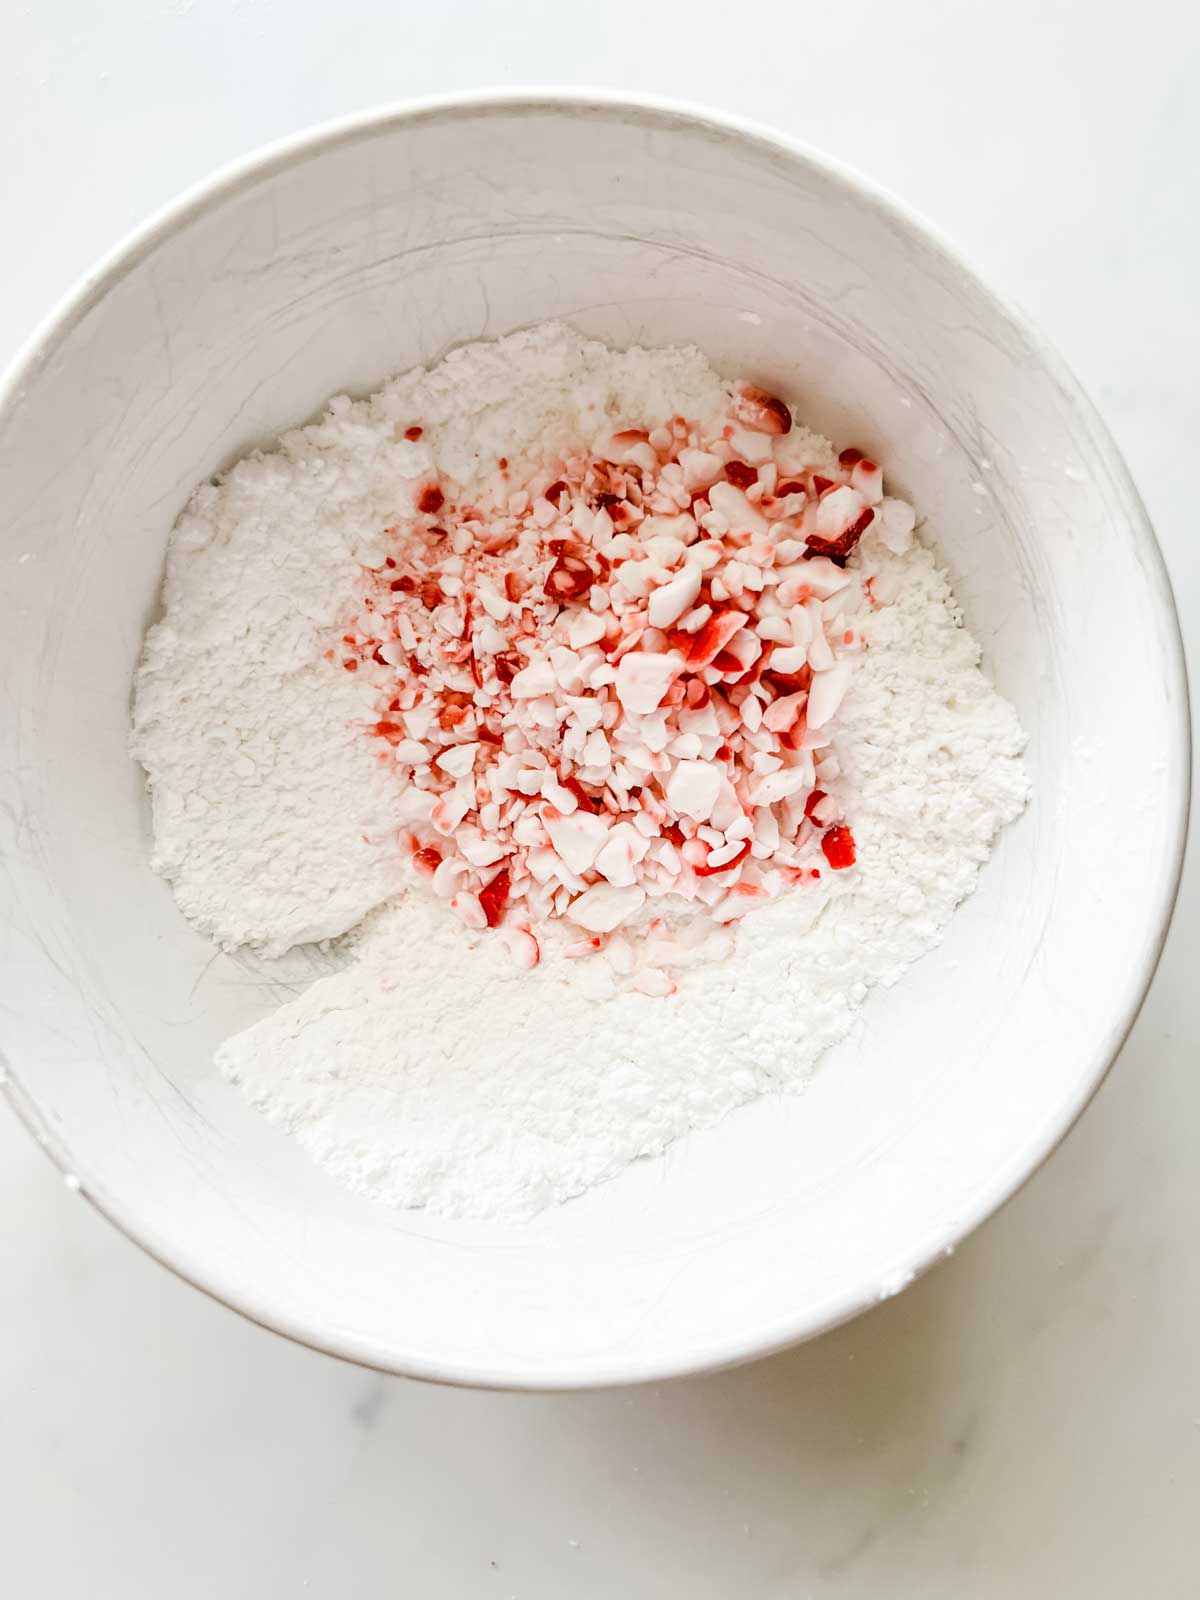 Powdered sugar and crushed peppermint in a white bowl.